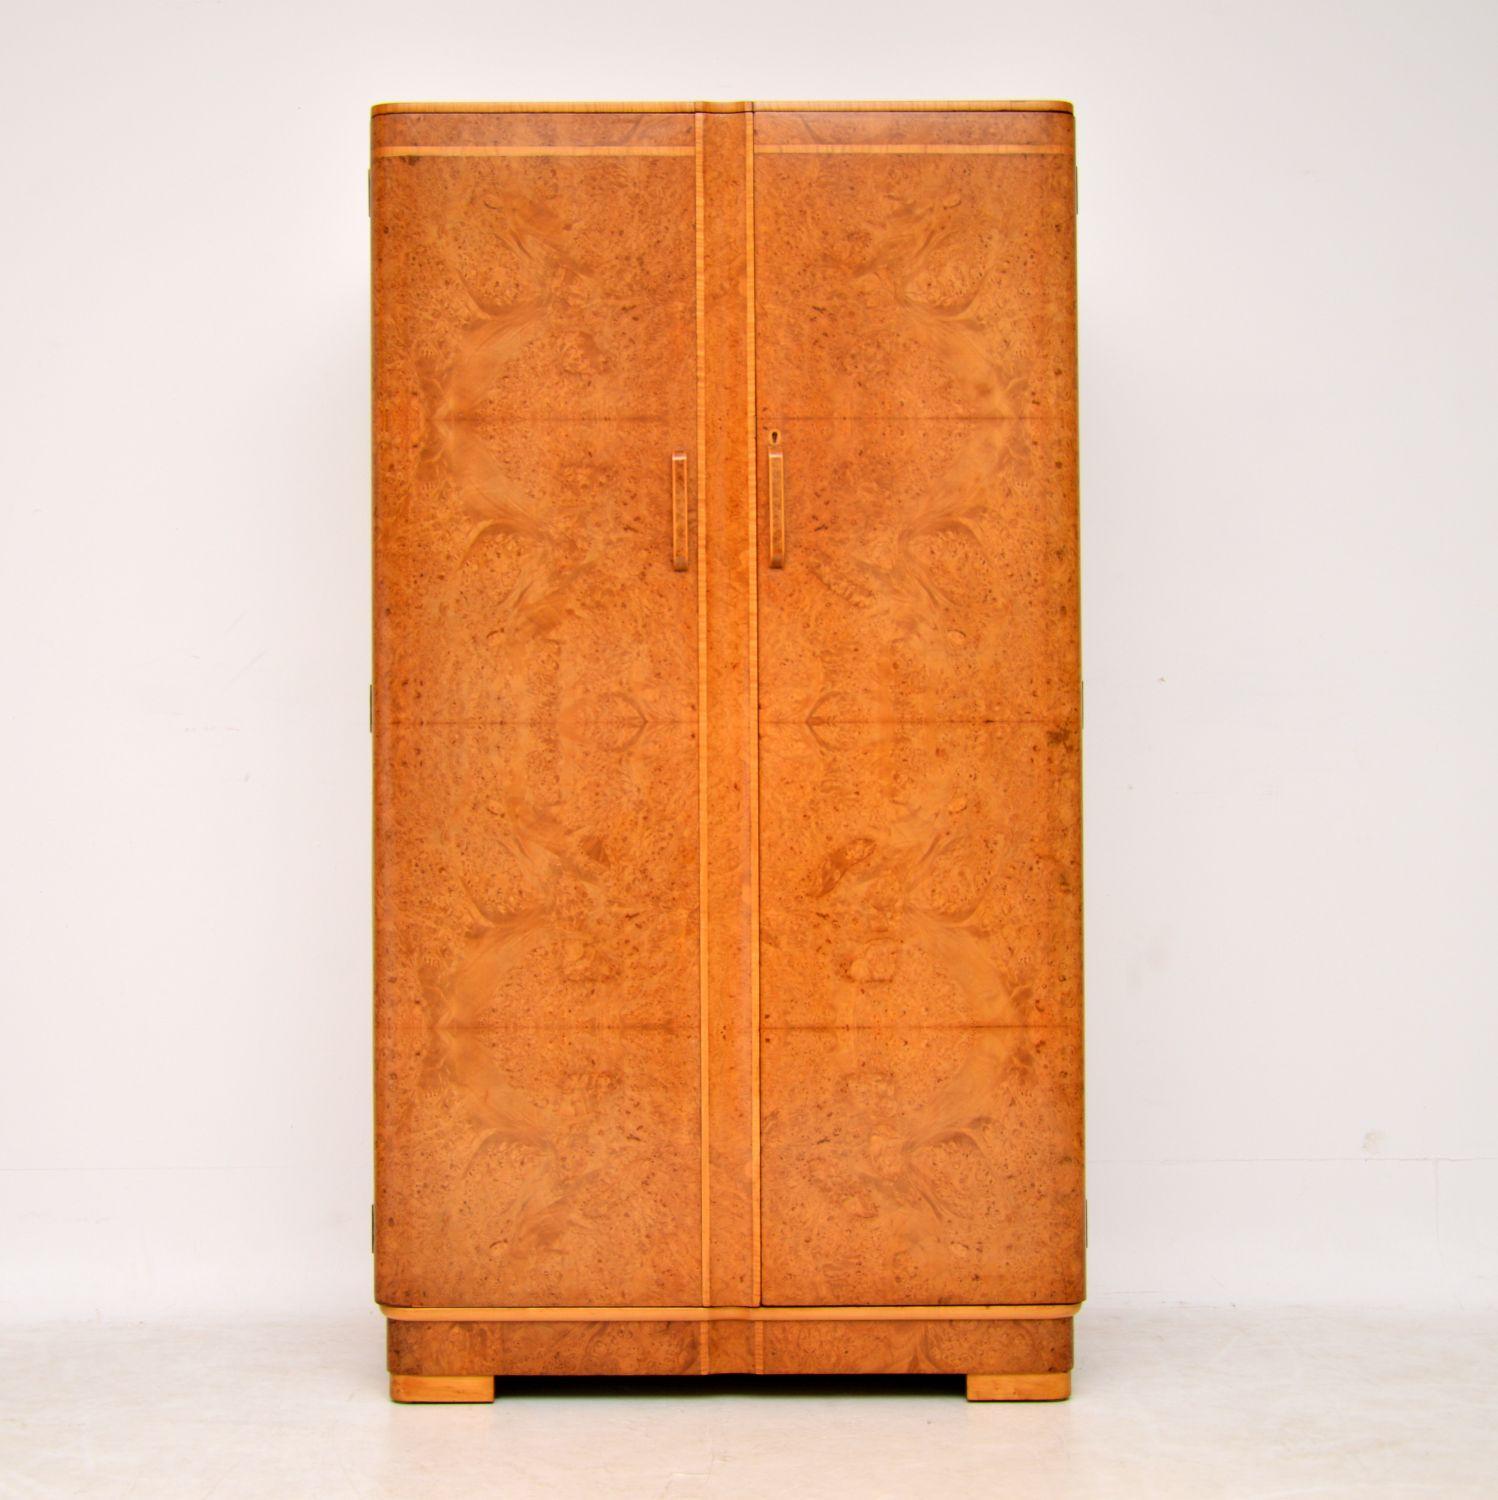 A beautiful original Art Deco period compactum wardrobe, dating from the 1920s-1930s. It’s made from burr walnut, inlaid with satin wood. We have had this stripped and re-polished to a very high standard, the condition is superb throughout. This has